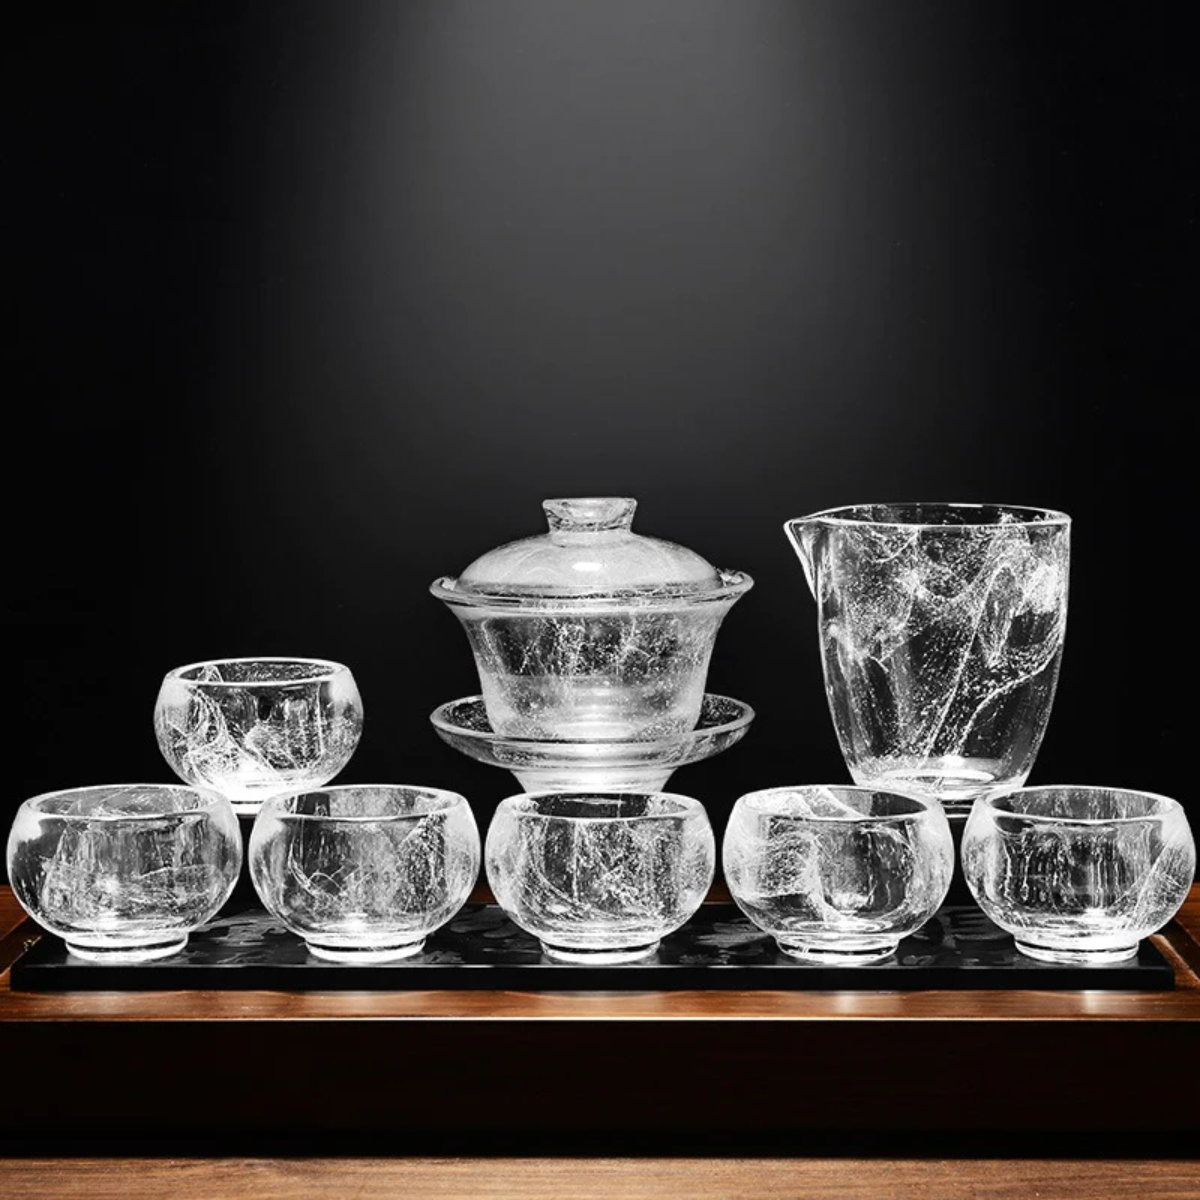 23. Sparkle & Sip: Elevate Your 15th Anniversary with a Crystal-Enhanced Tea Set